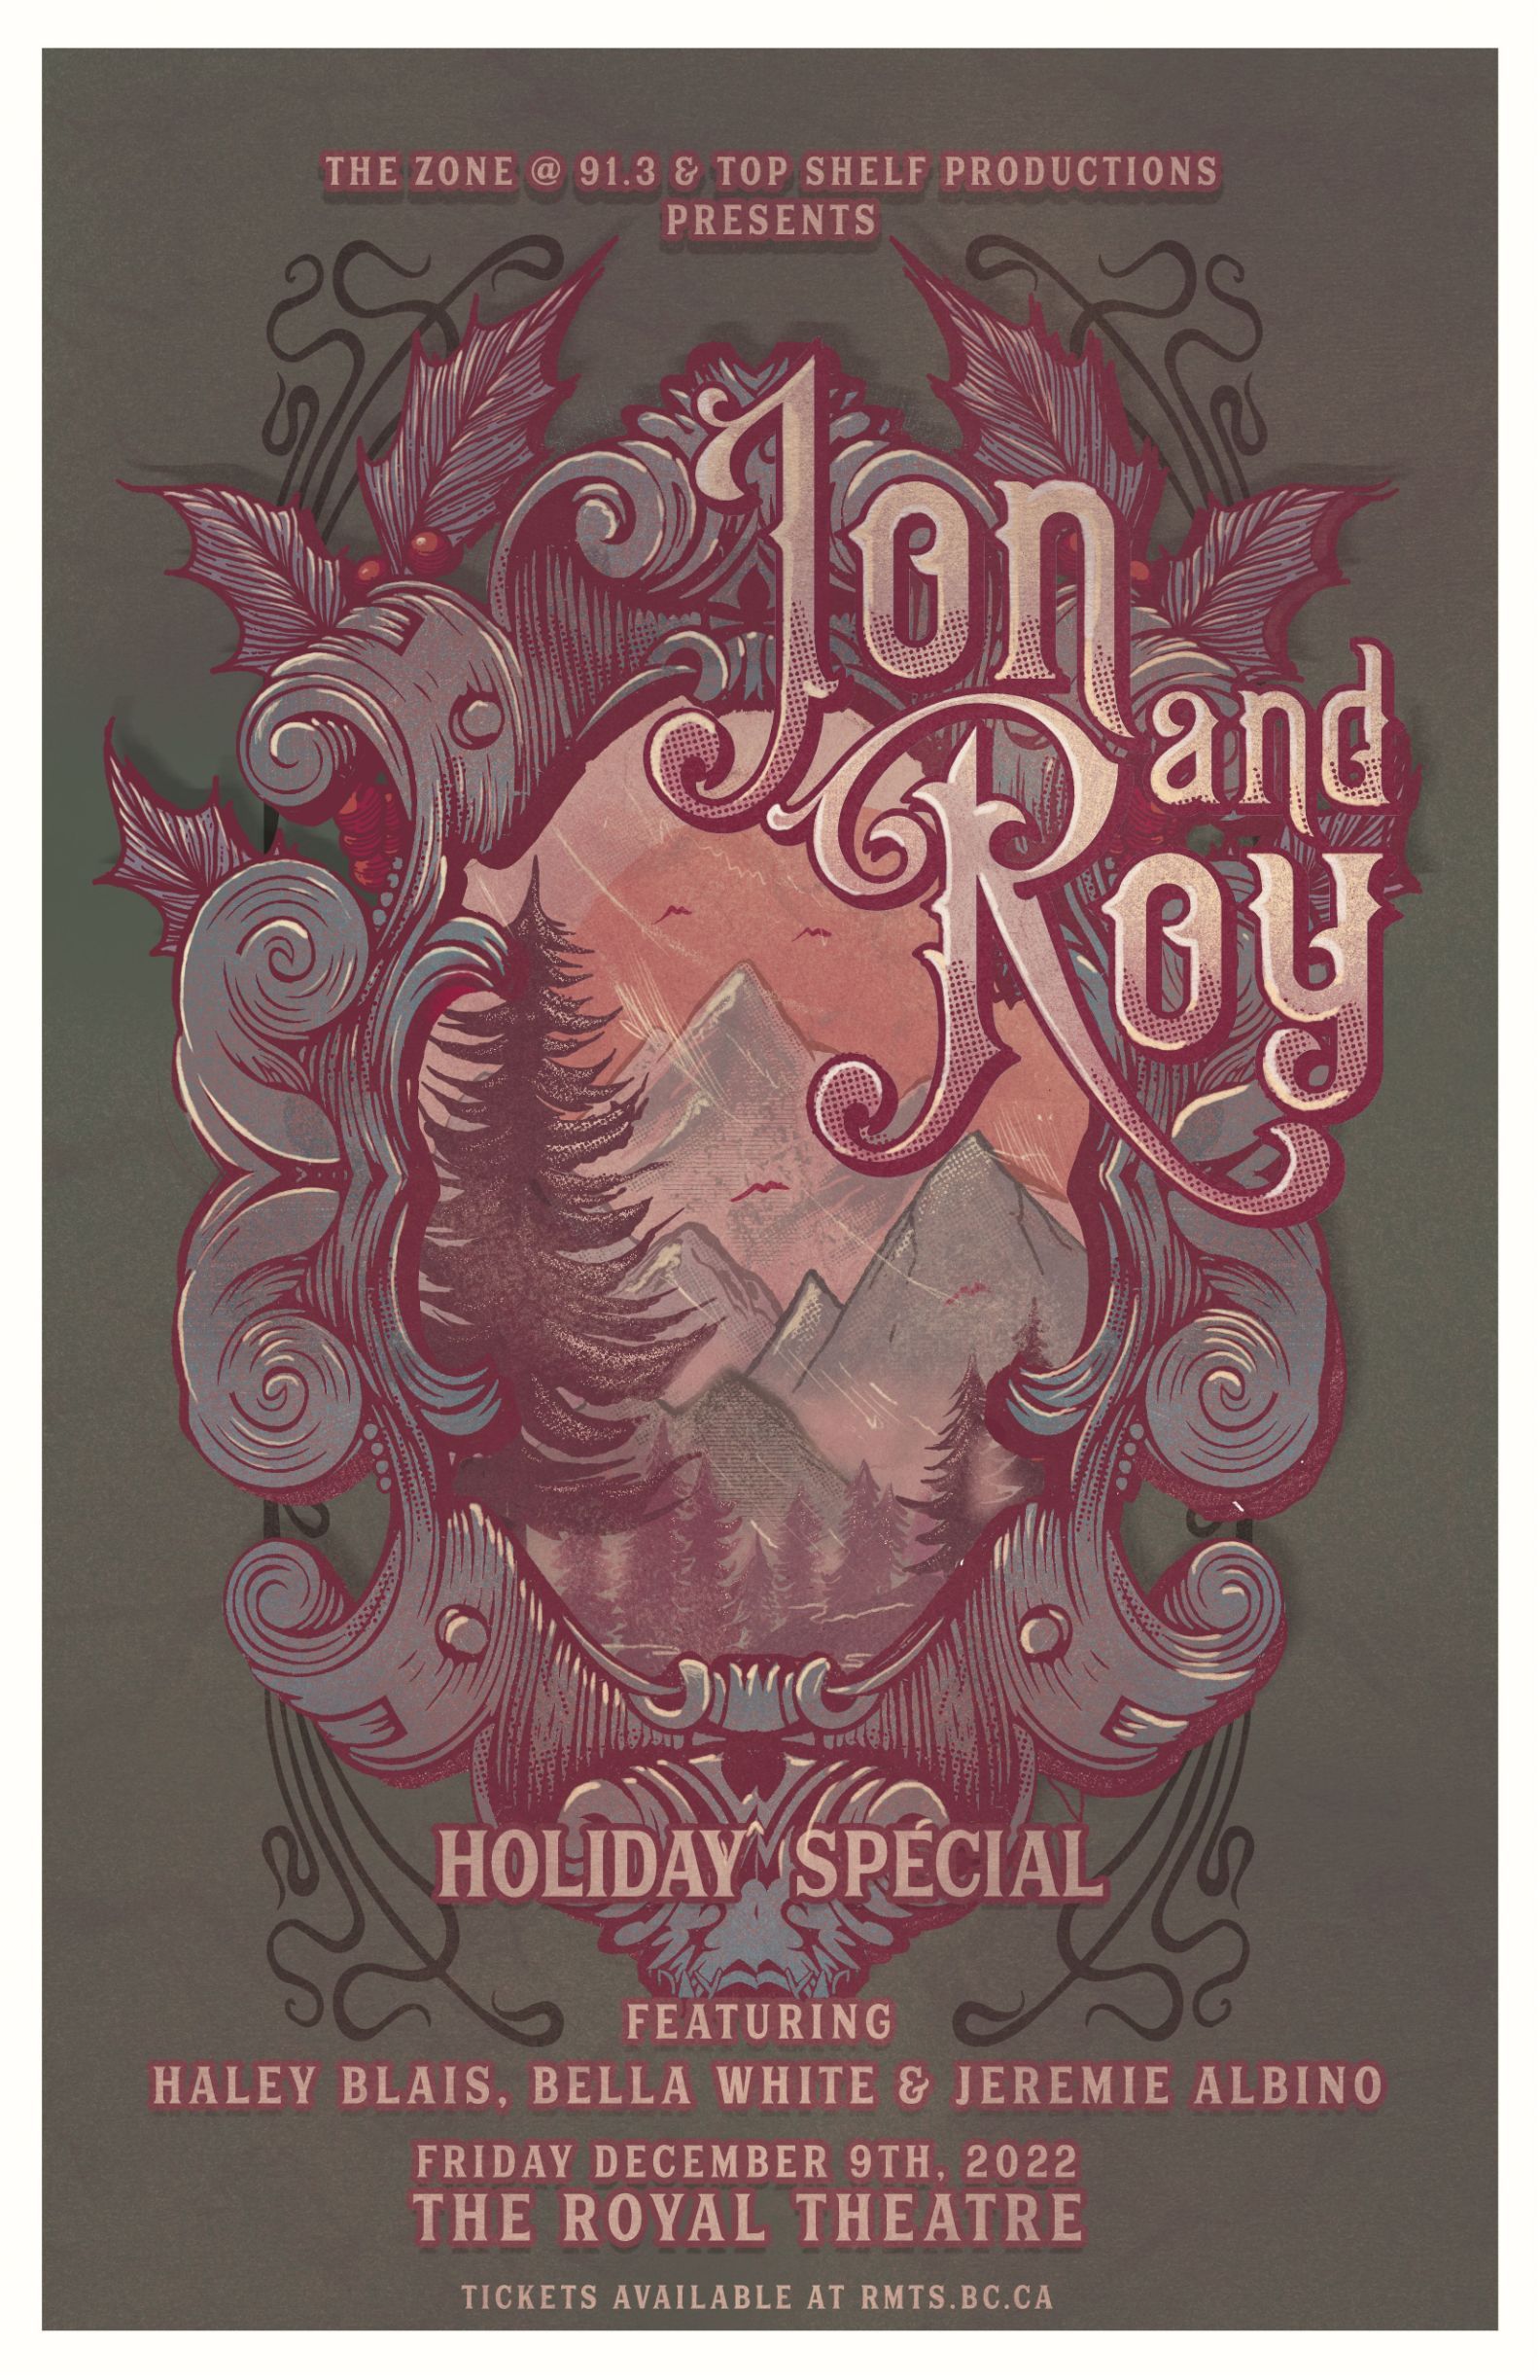 JnR_Holiday_Special_Poster (optimized)